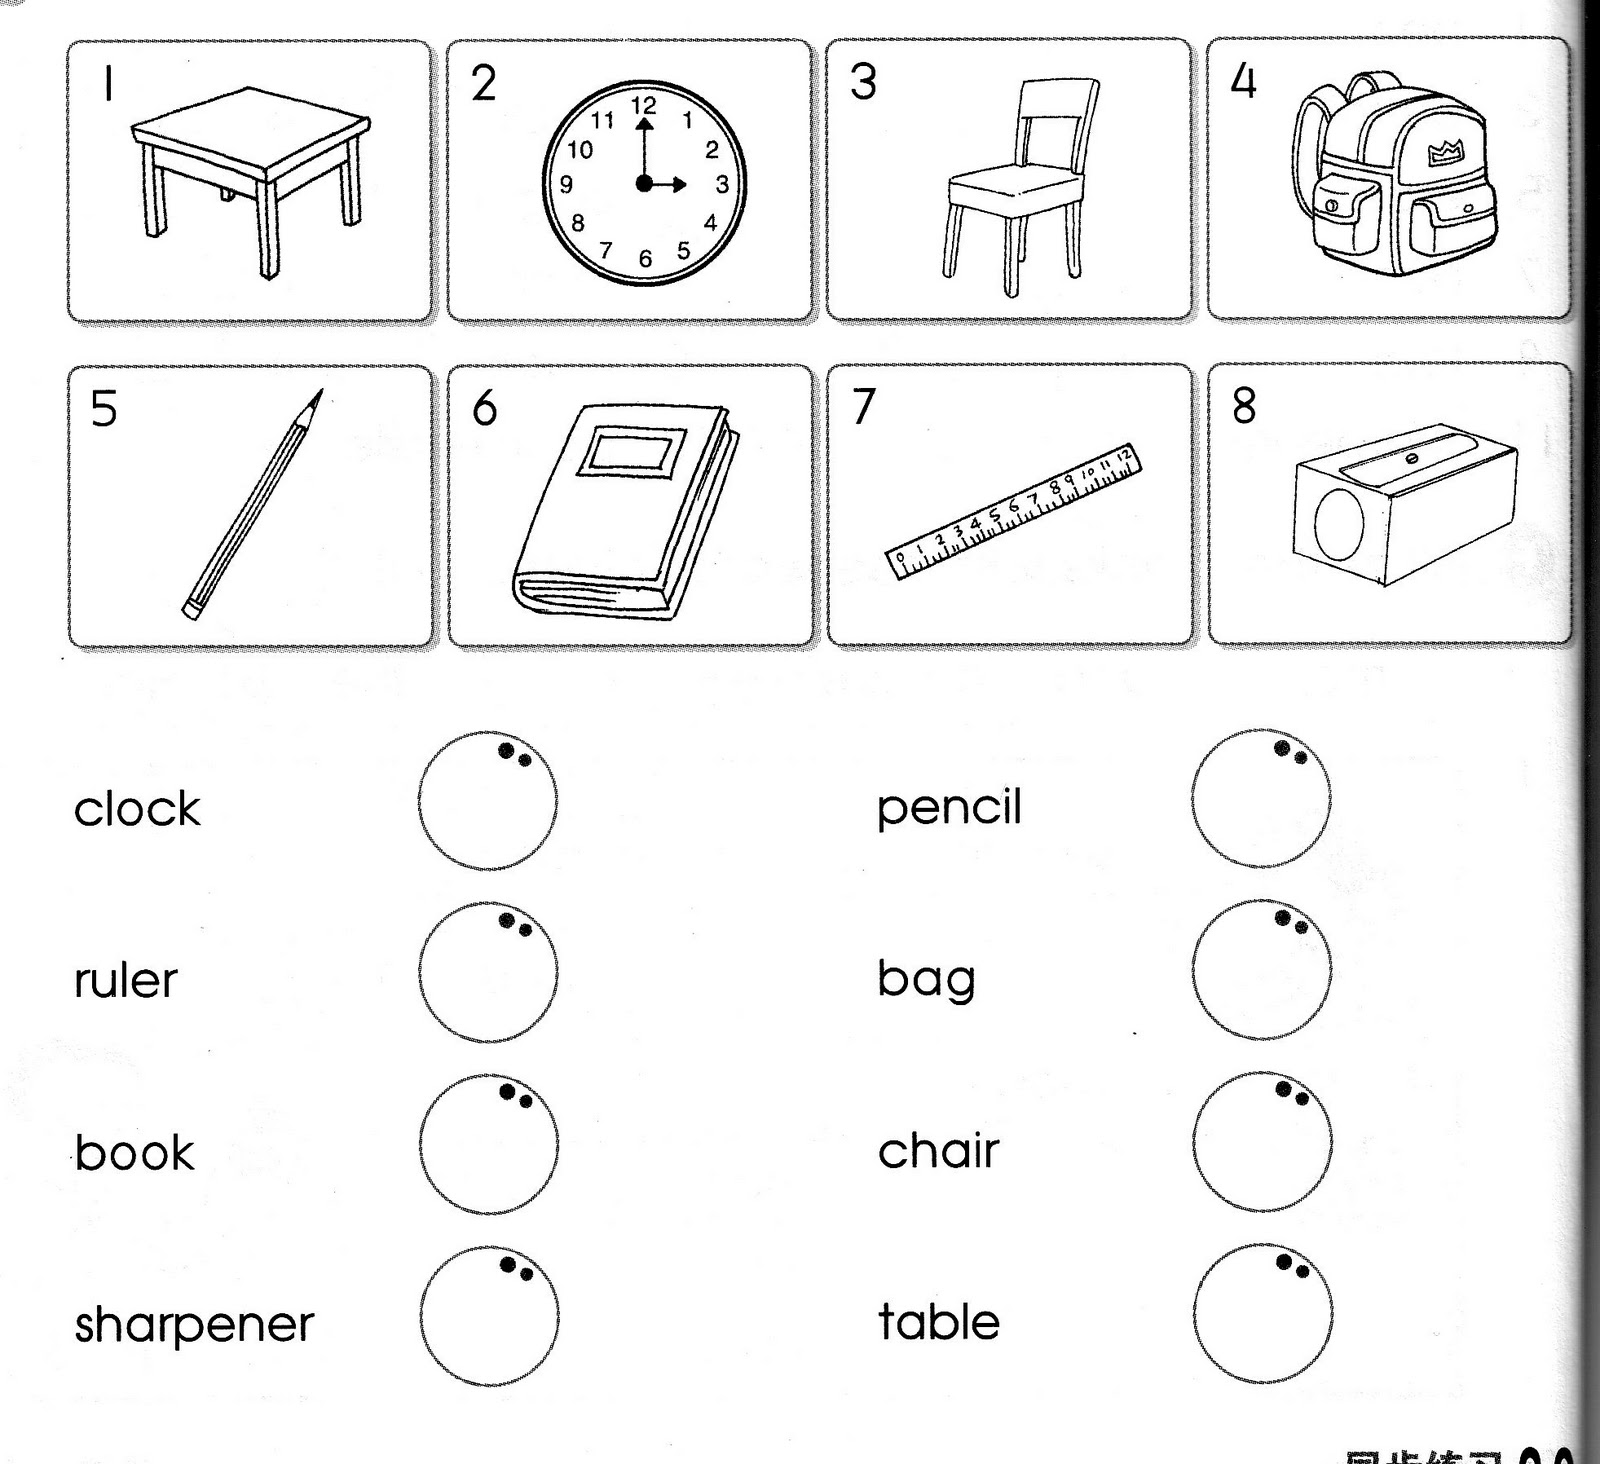 9-best-images-of-school-classroom-objects-worksheets-classroom